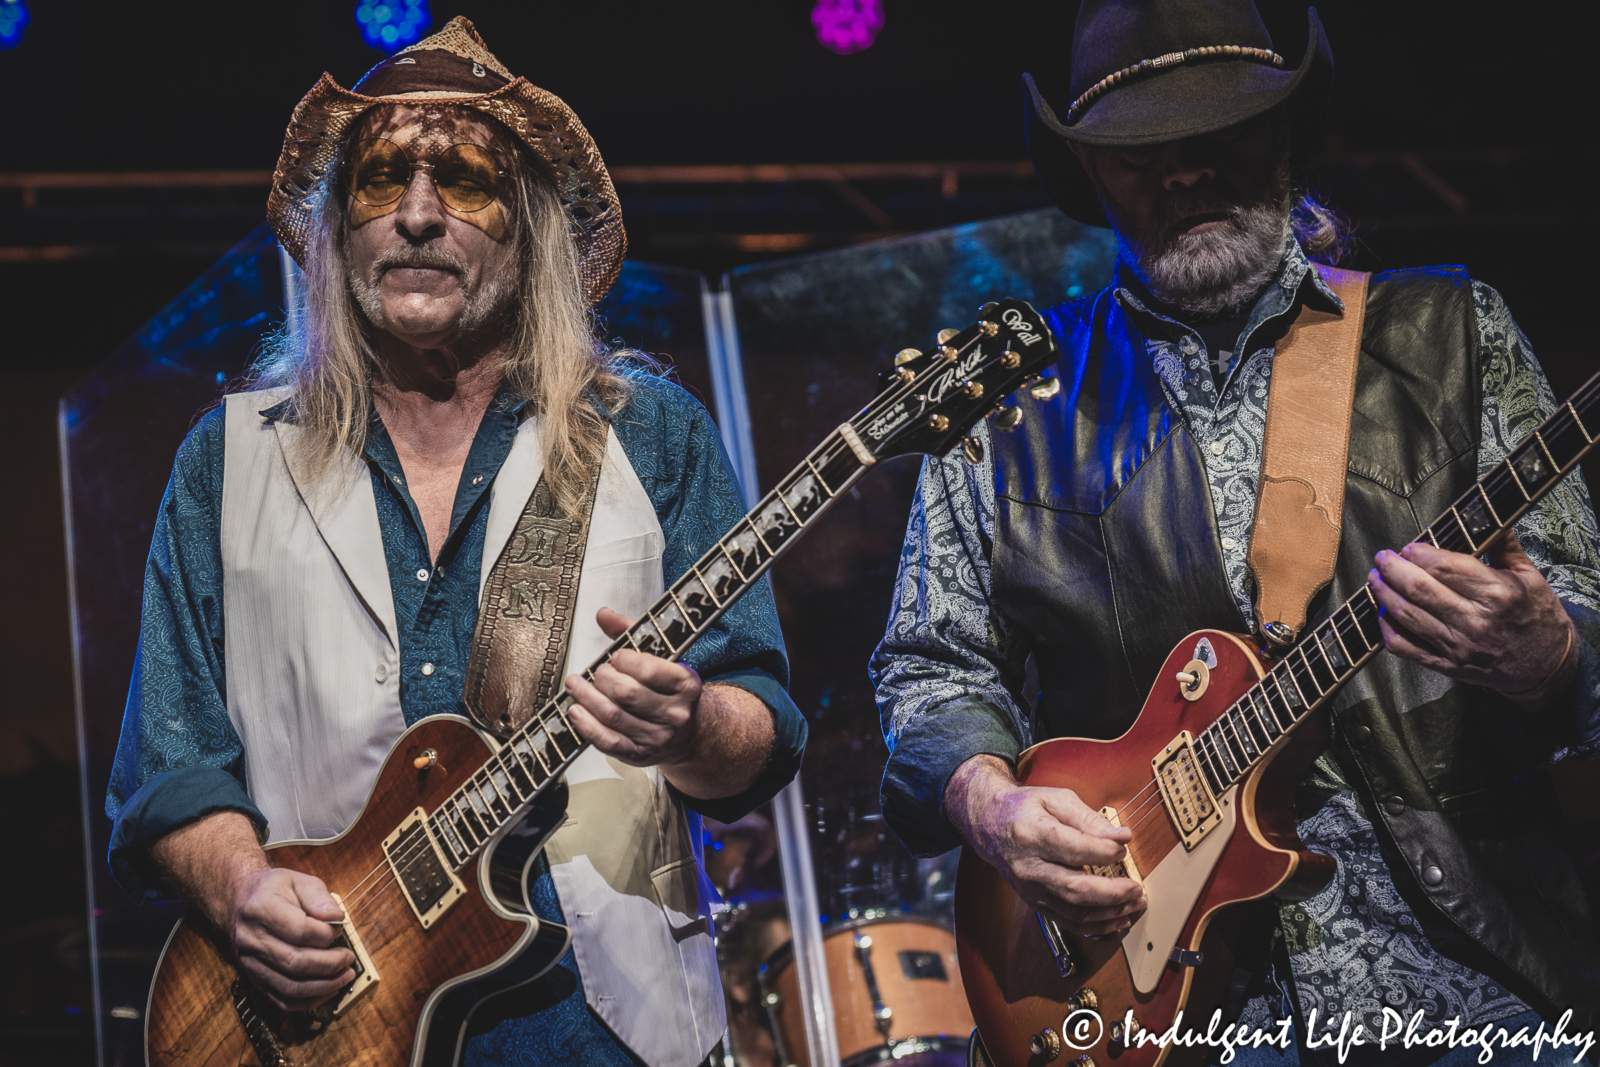 Guitarists Chris Hicks and Rick Willis of The Marshall Tucker Band performing together at Ameristar Casino in Kansas City, MO on December 1, 2023